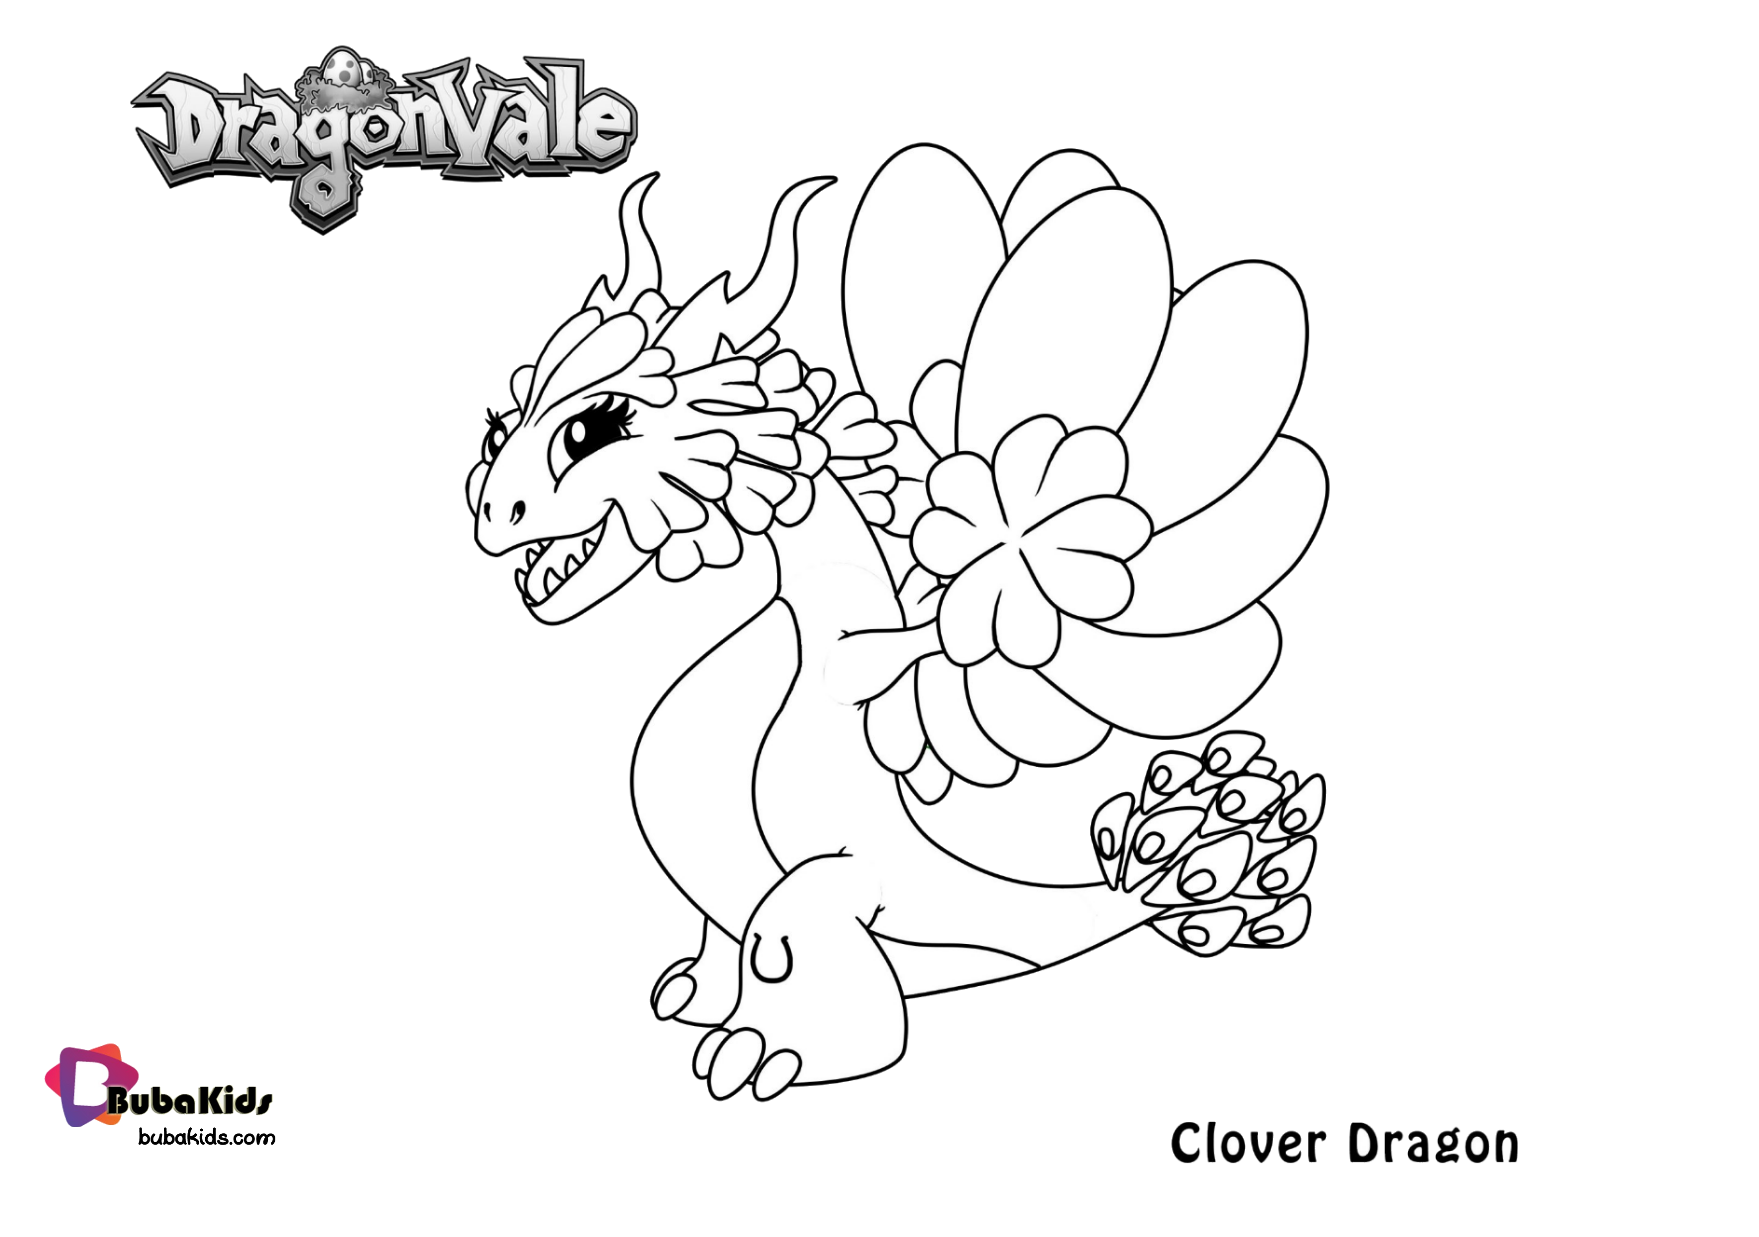 Dragonvale the clover dragon coloring page. Wallpaper